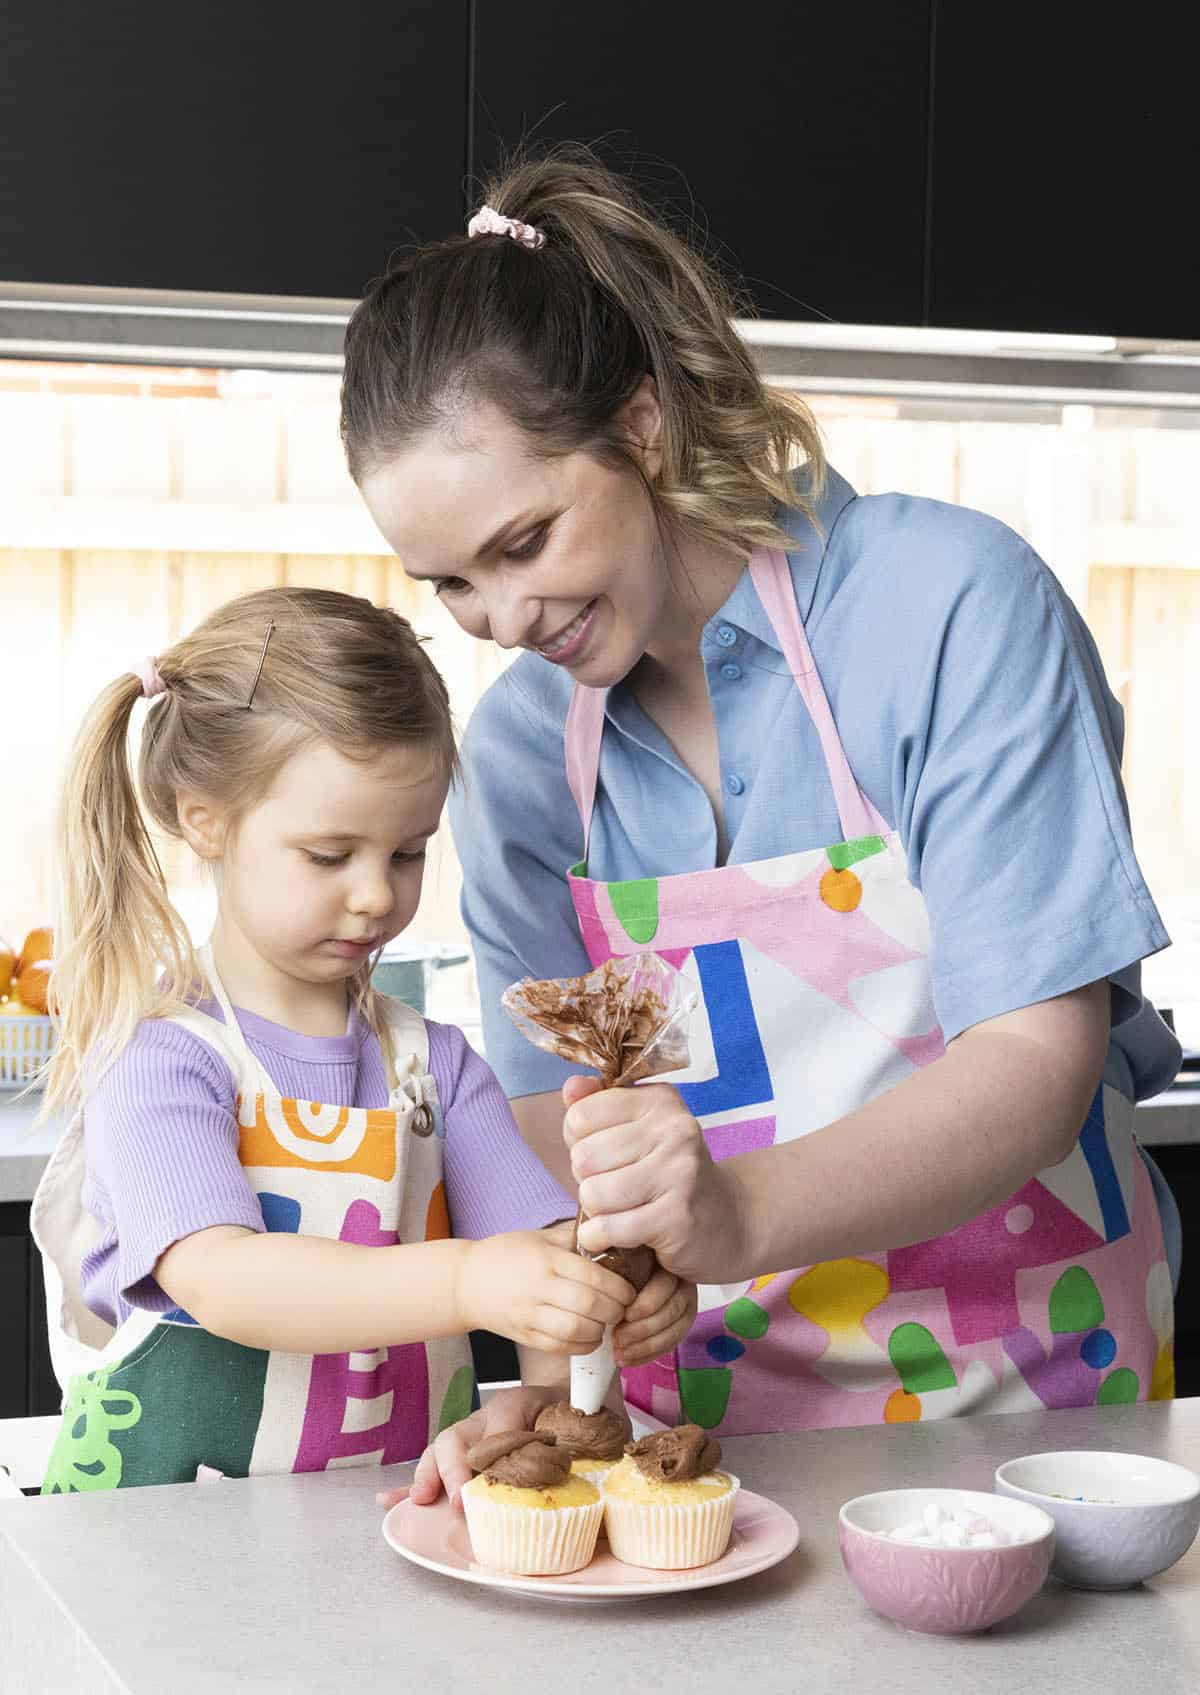 Jessica Holmes baking with her daughter in the kitchen.